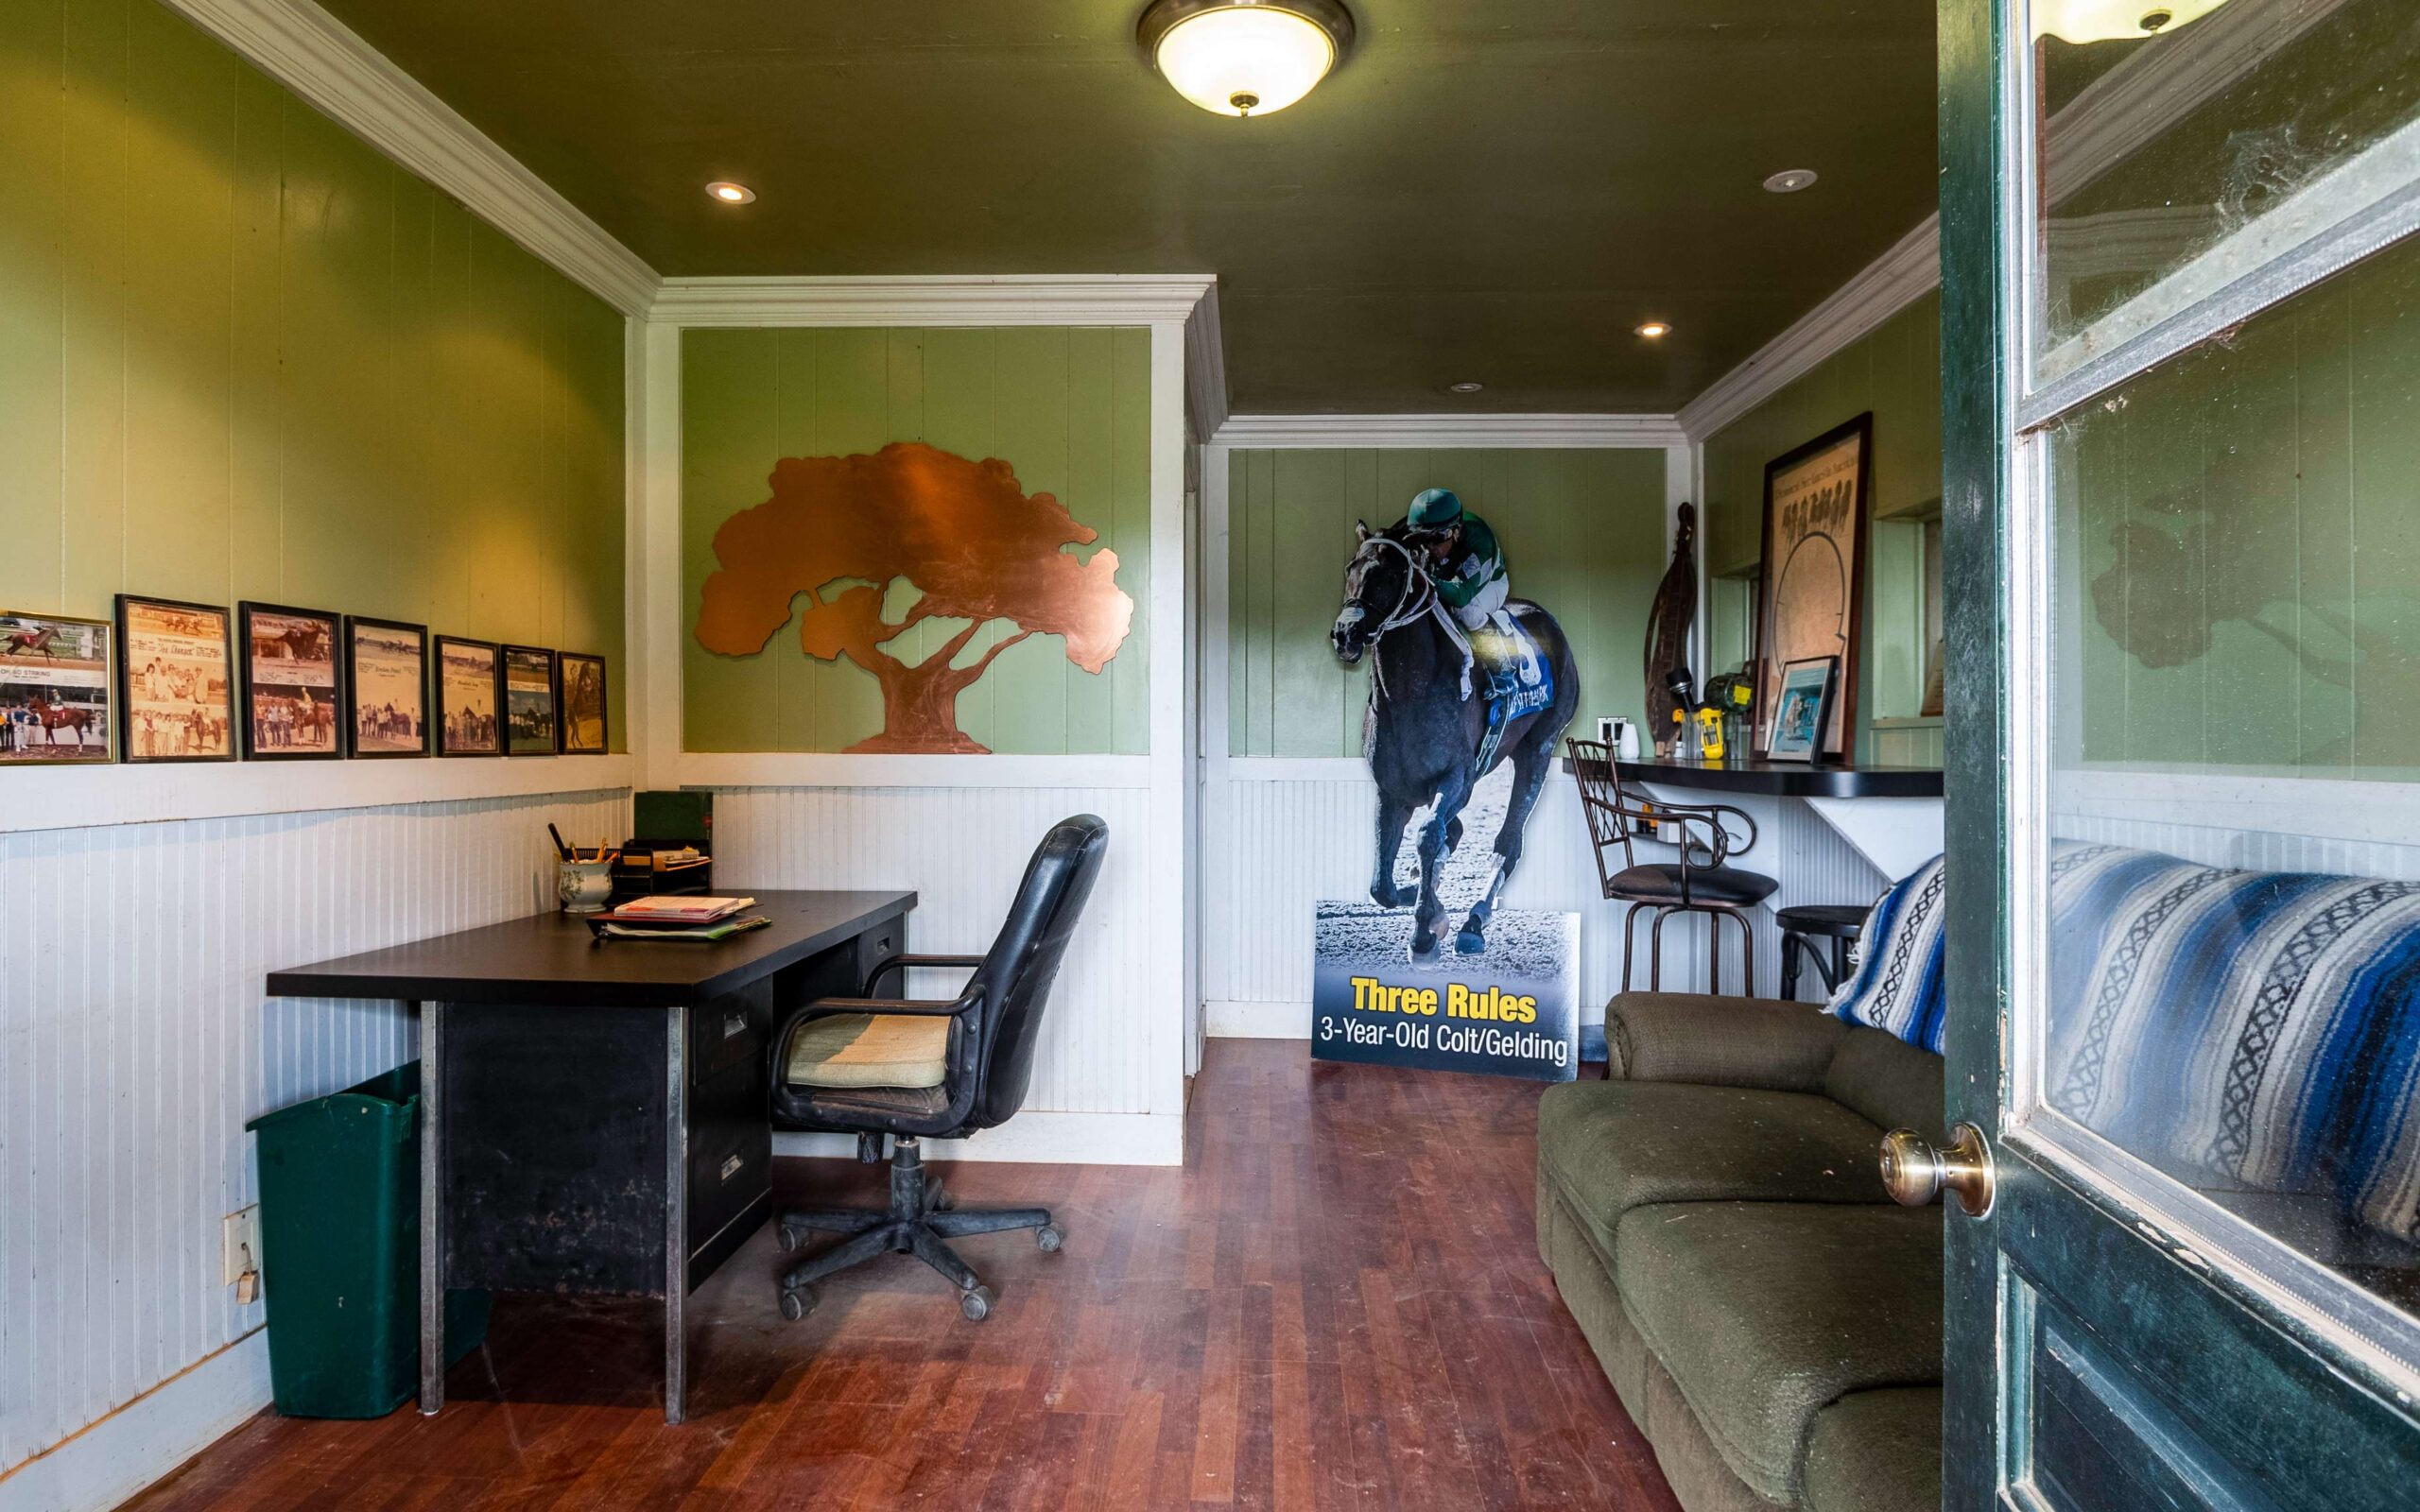 The farm's office with large racehorse image on the wall.